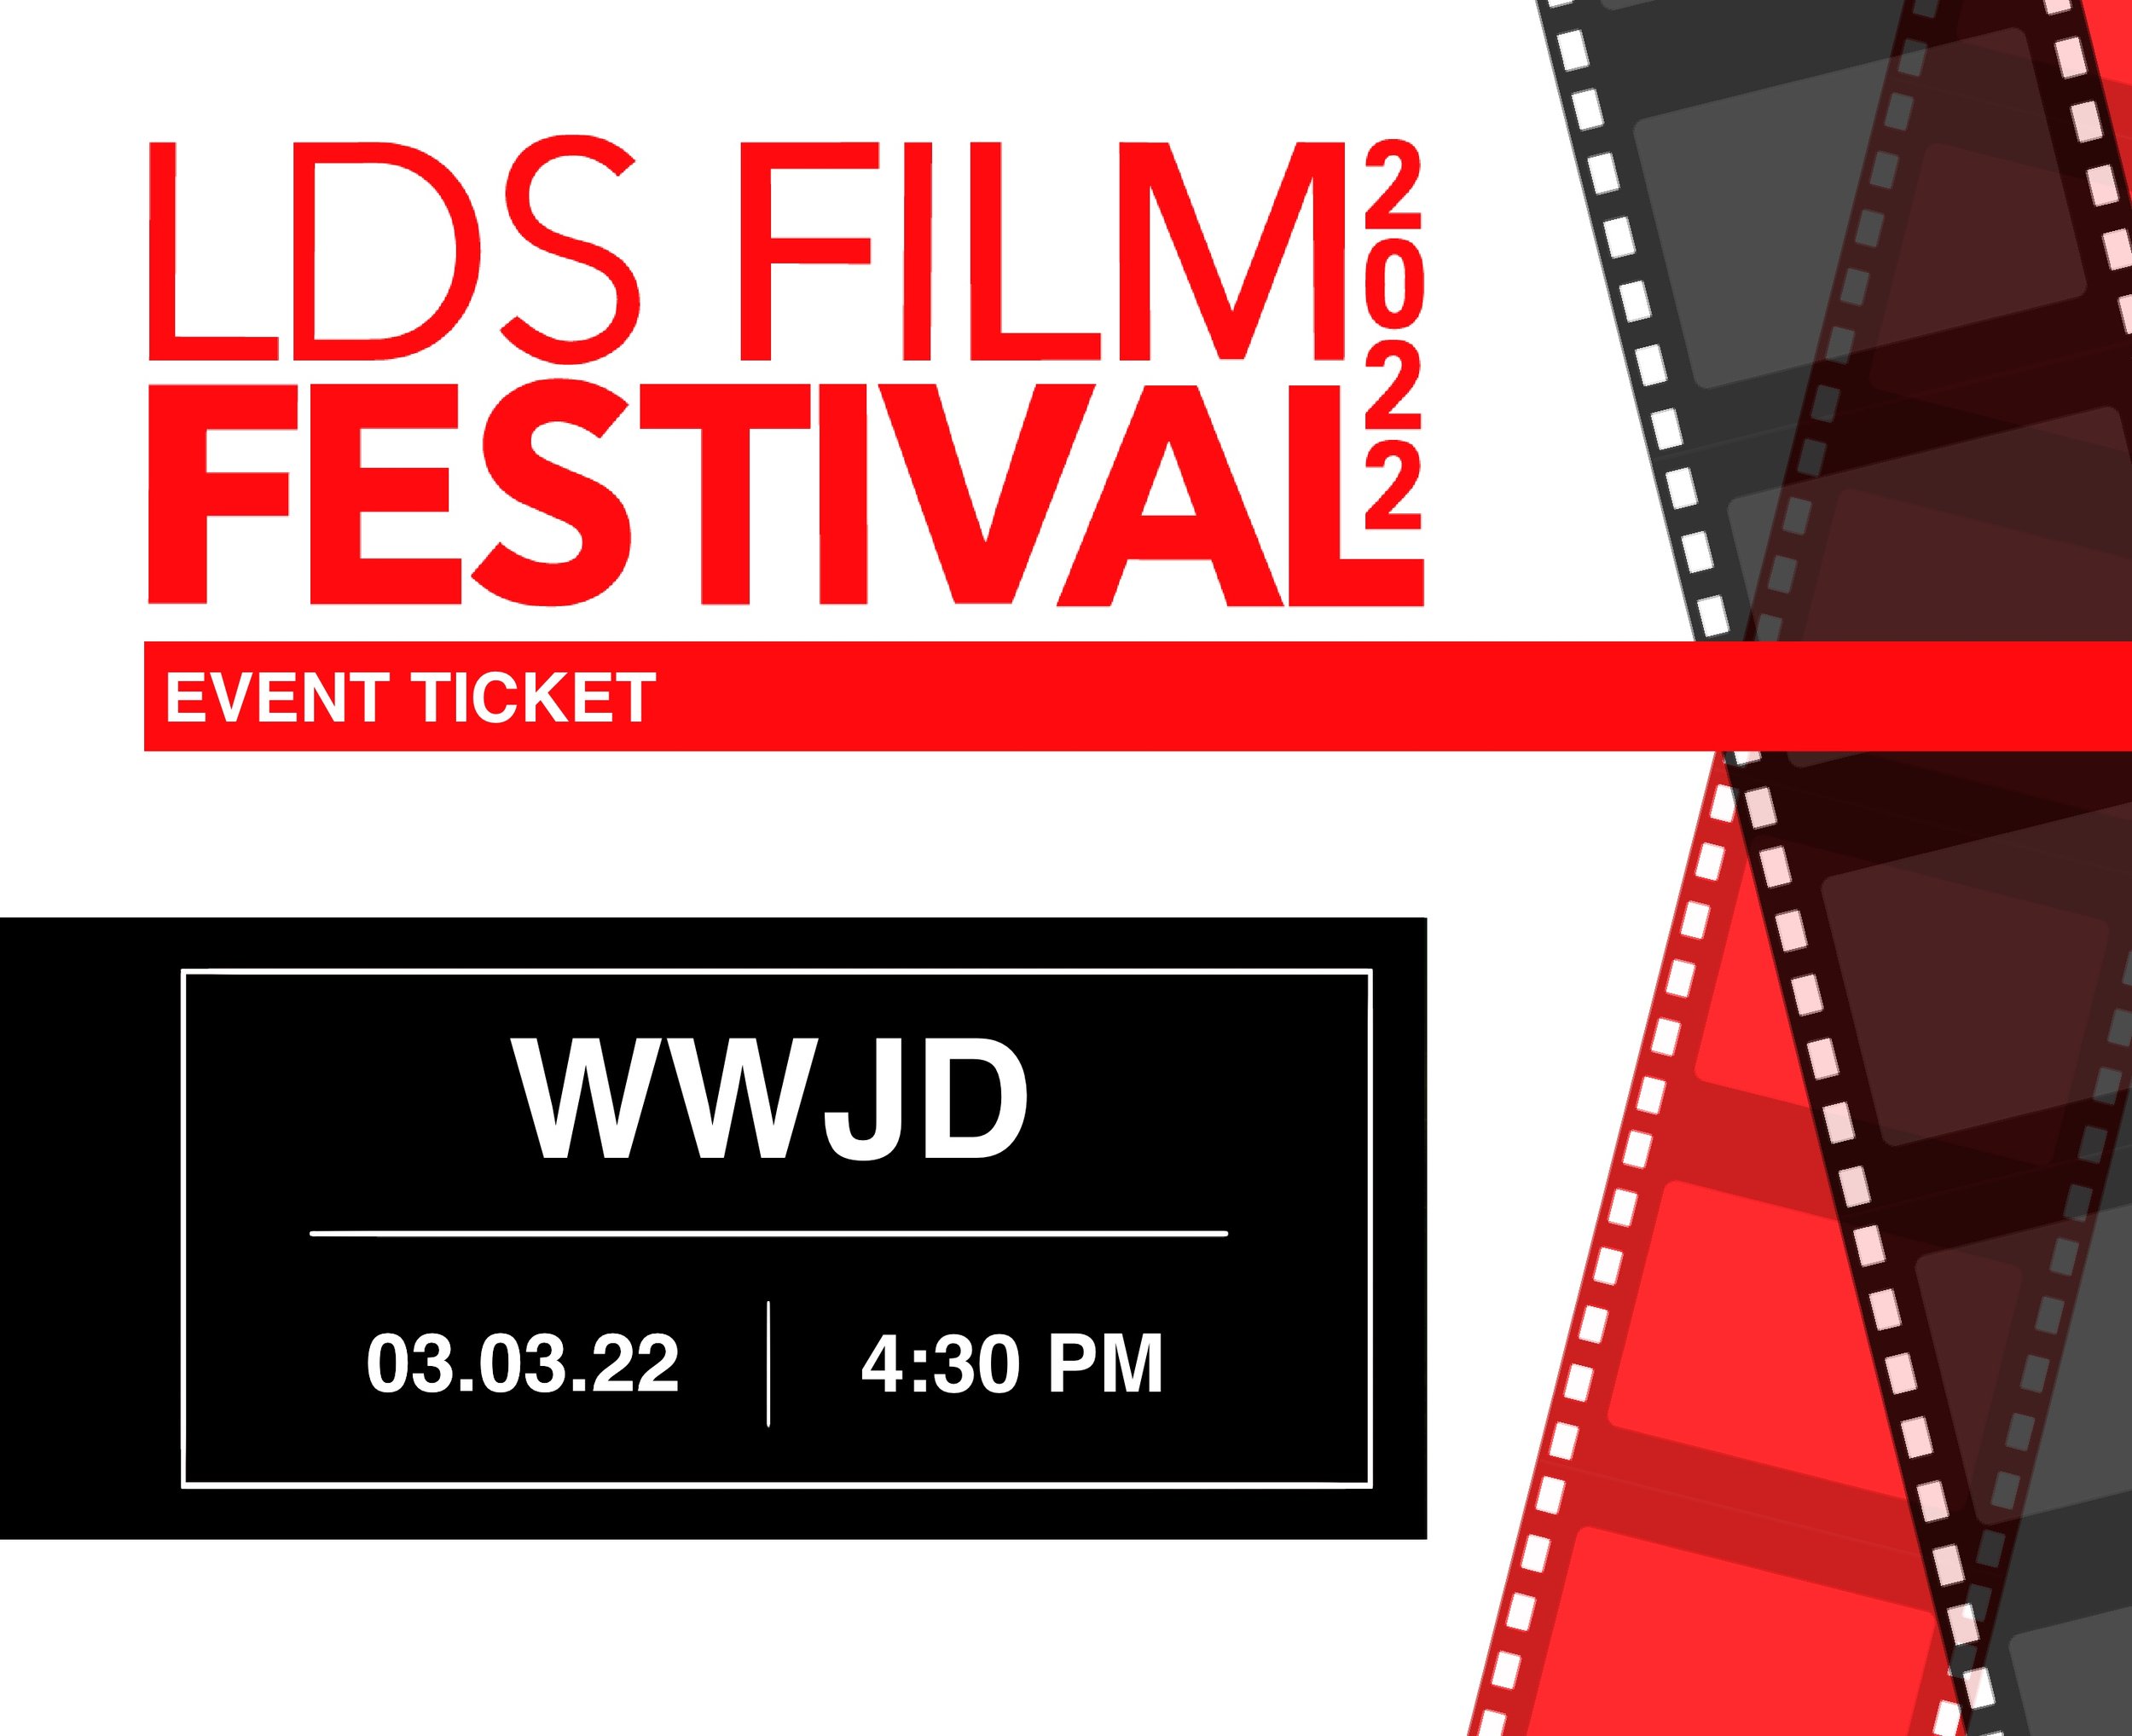 WWJD03.03.22 | 4:30 PM Clarke Grand Theatre - Three college roommates get an unexpected weekend houseguest: Jesus Christ, the Savior and Redeemer of mankind. Q&A with filmmakers 